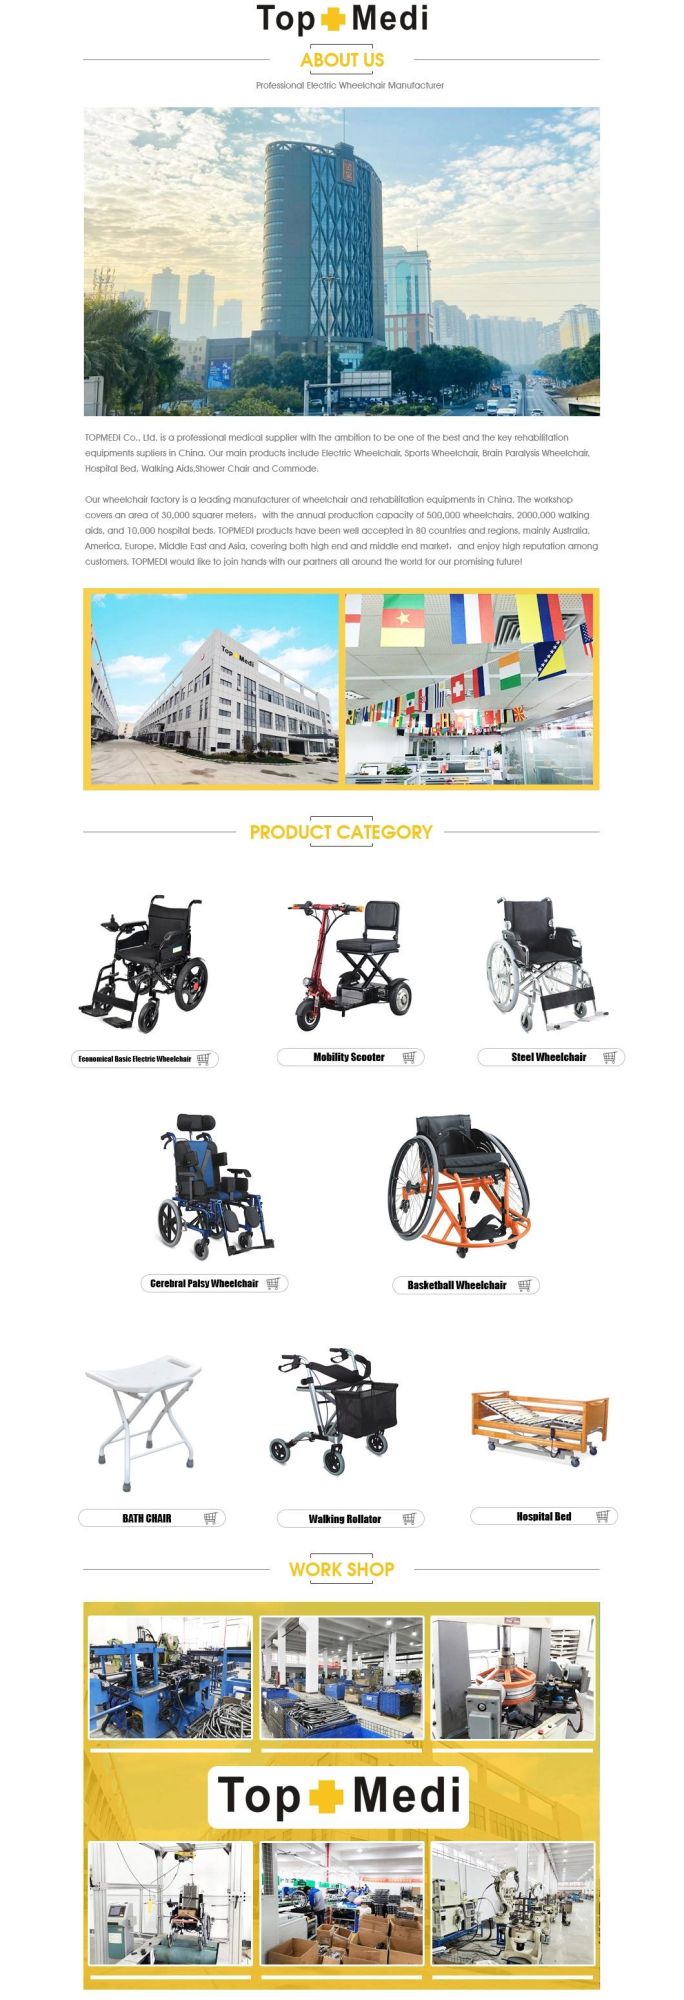 Topmedi Seat Lifting Functional Deluxury Electric Power Wheelchair for Disabled Handicapped People